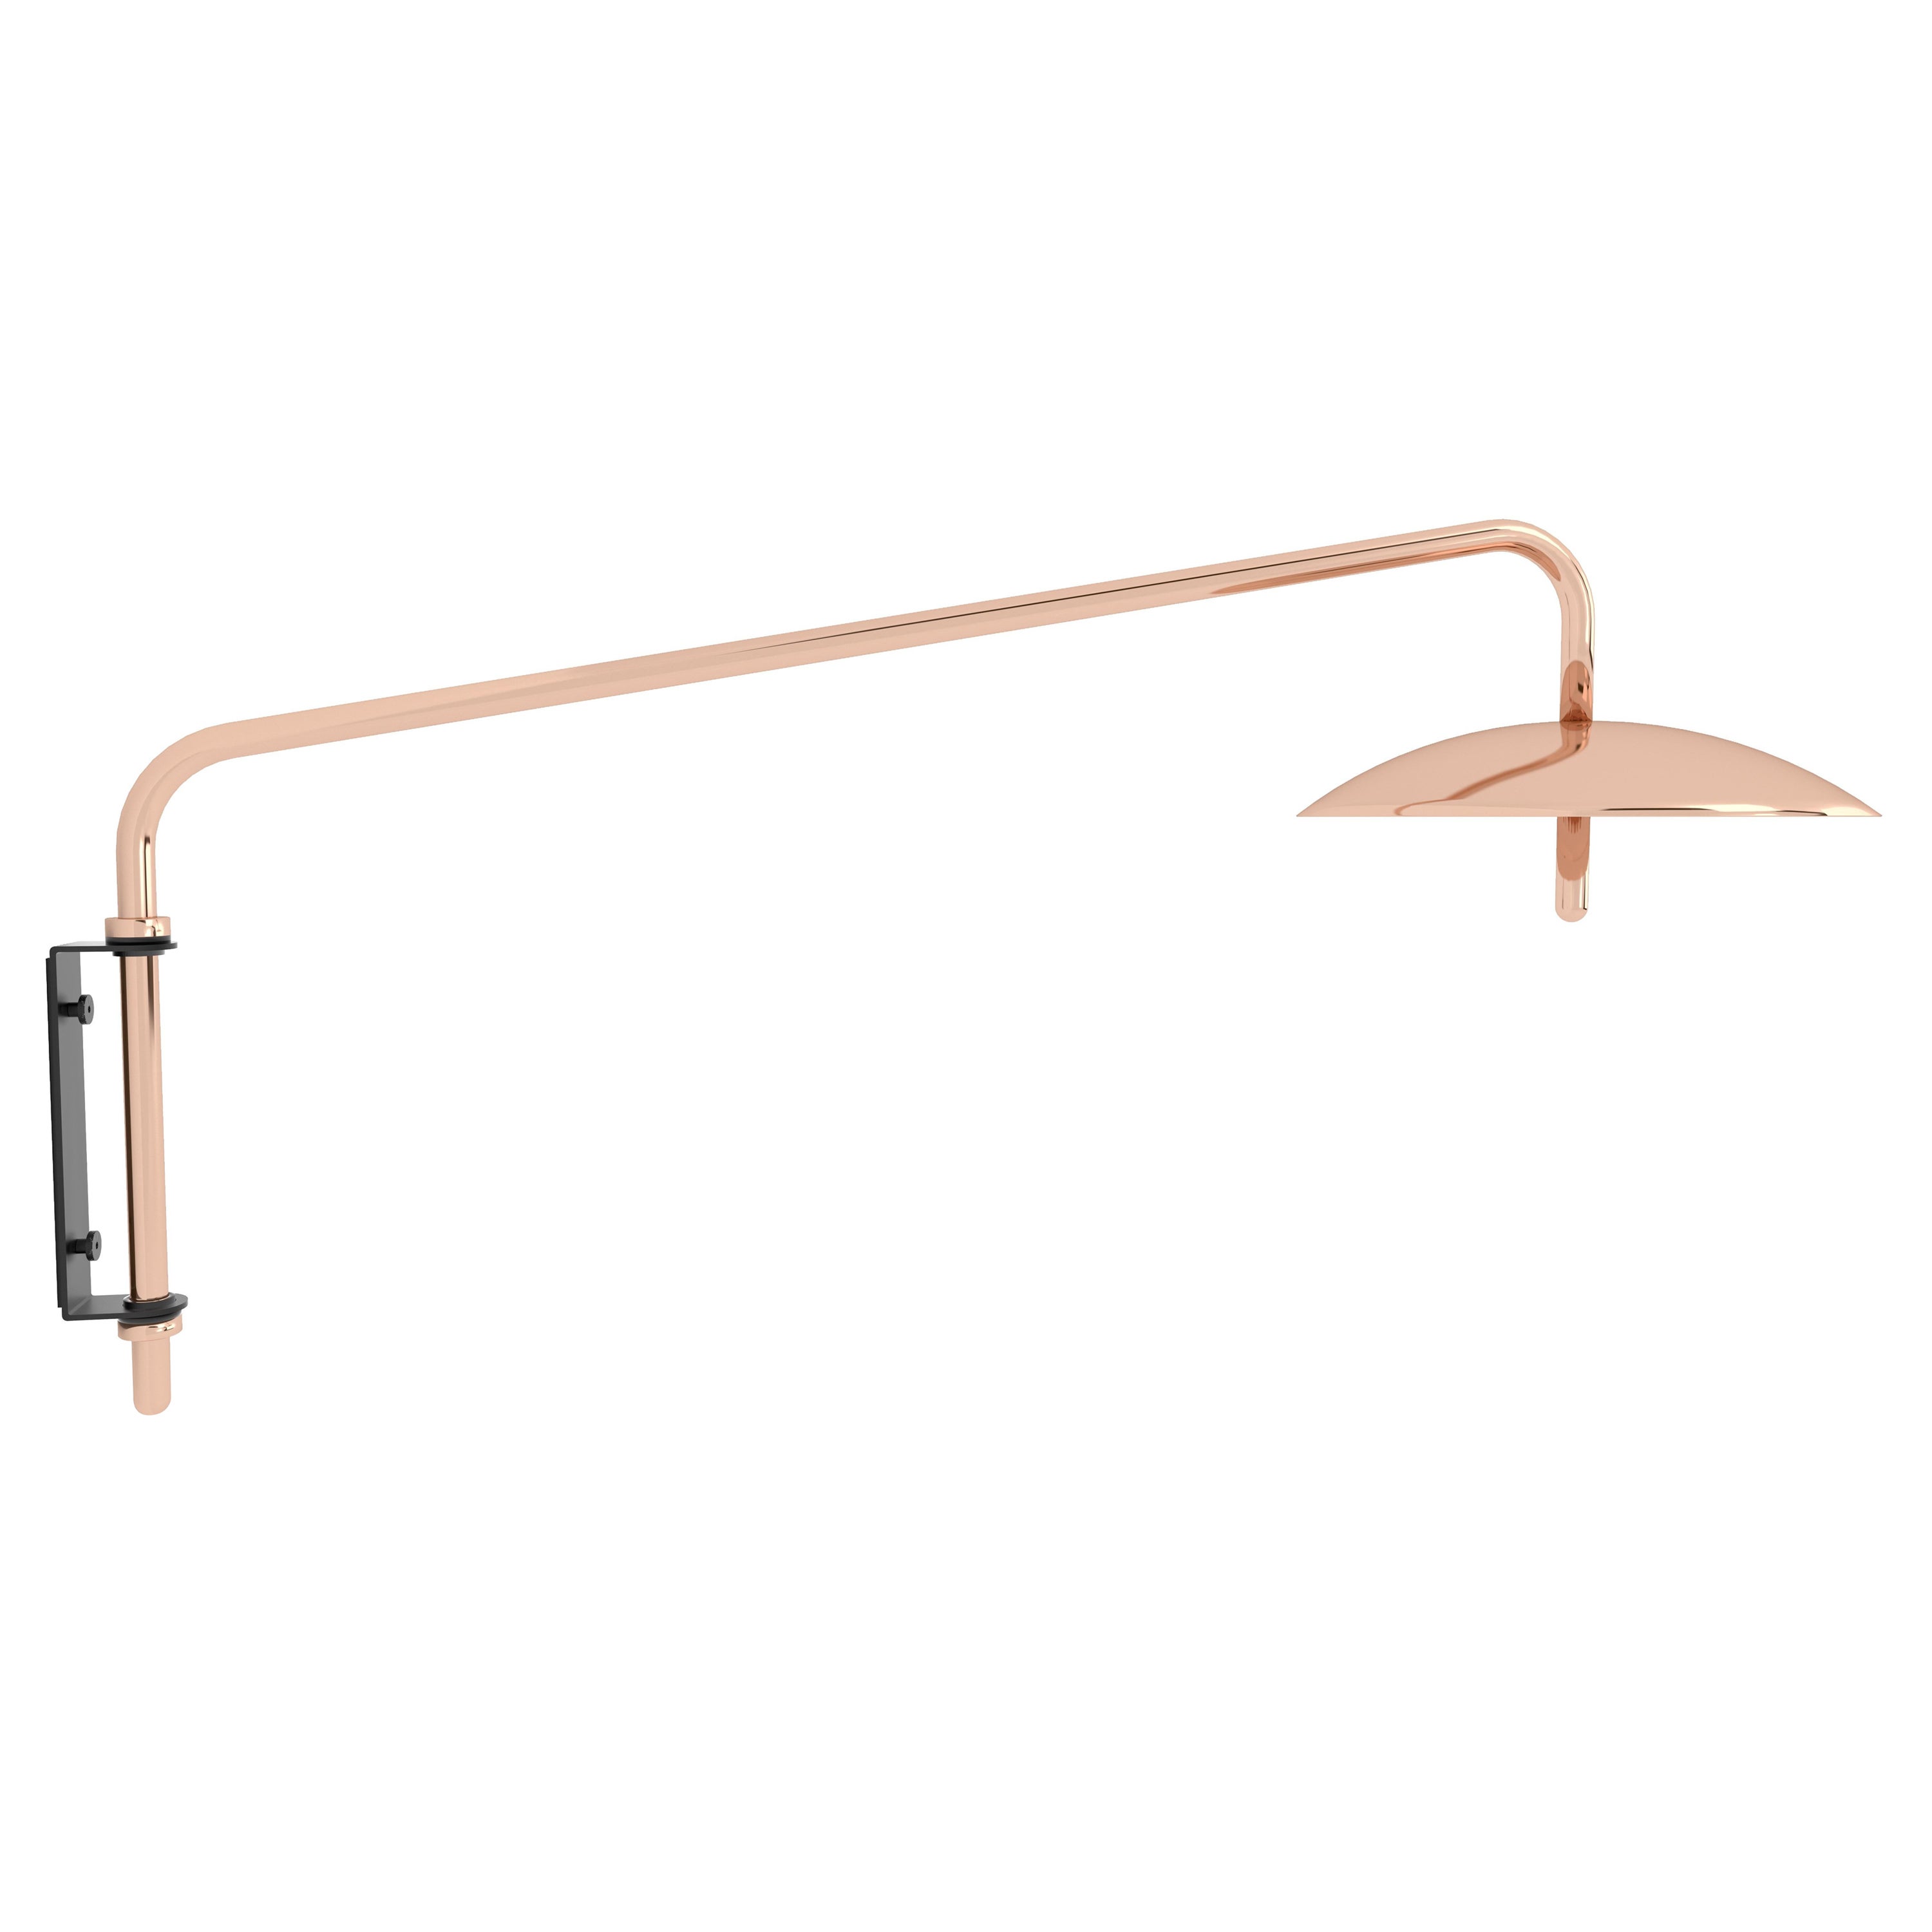 Signal Swing Arm Sconce in Copper, Short, from Souda, Made to Order For Sale